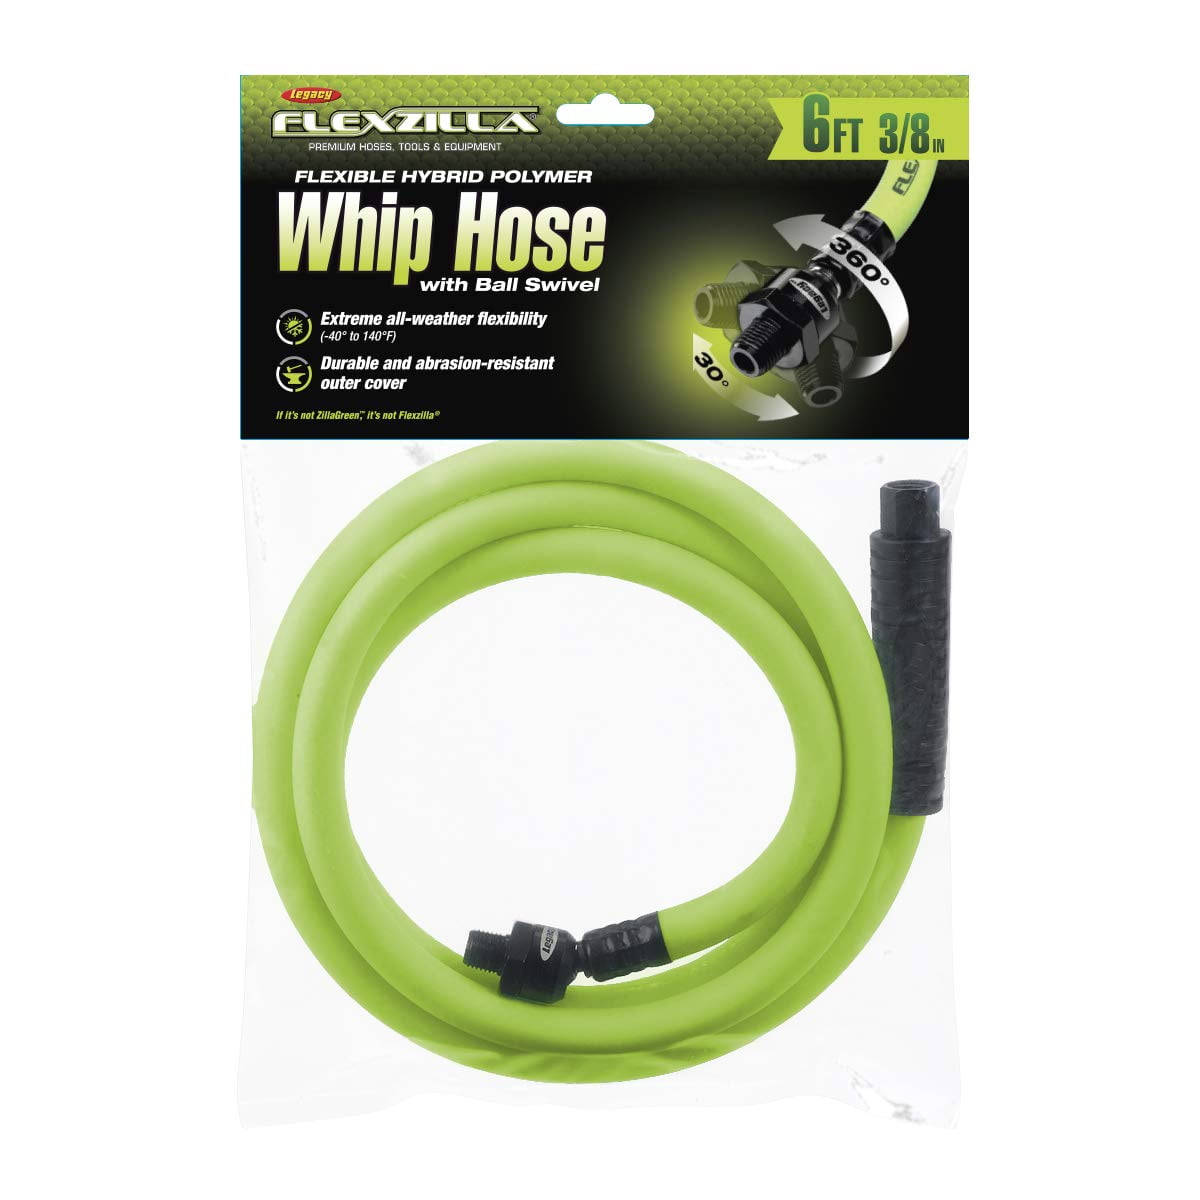 Thermoid 3/8 in x 6 ft Rubber Air Hose Whip w/ Twistlock and Brass Fittings USA 